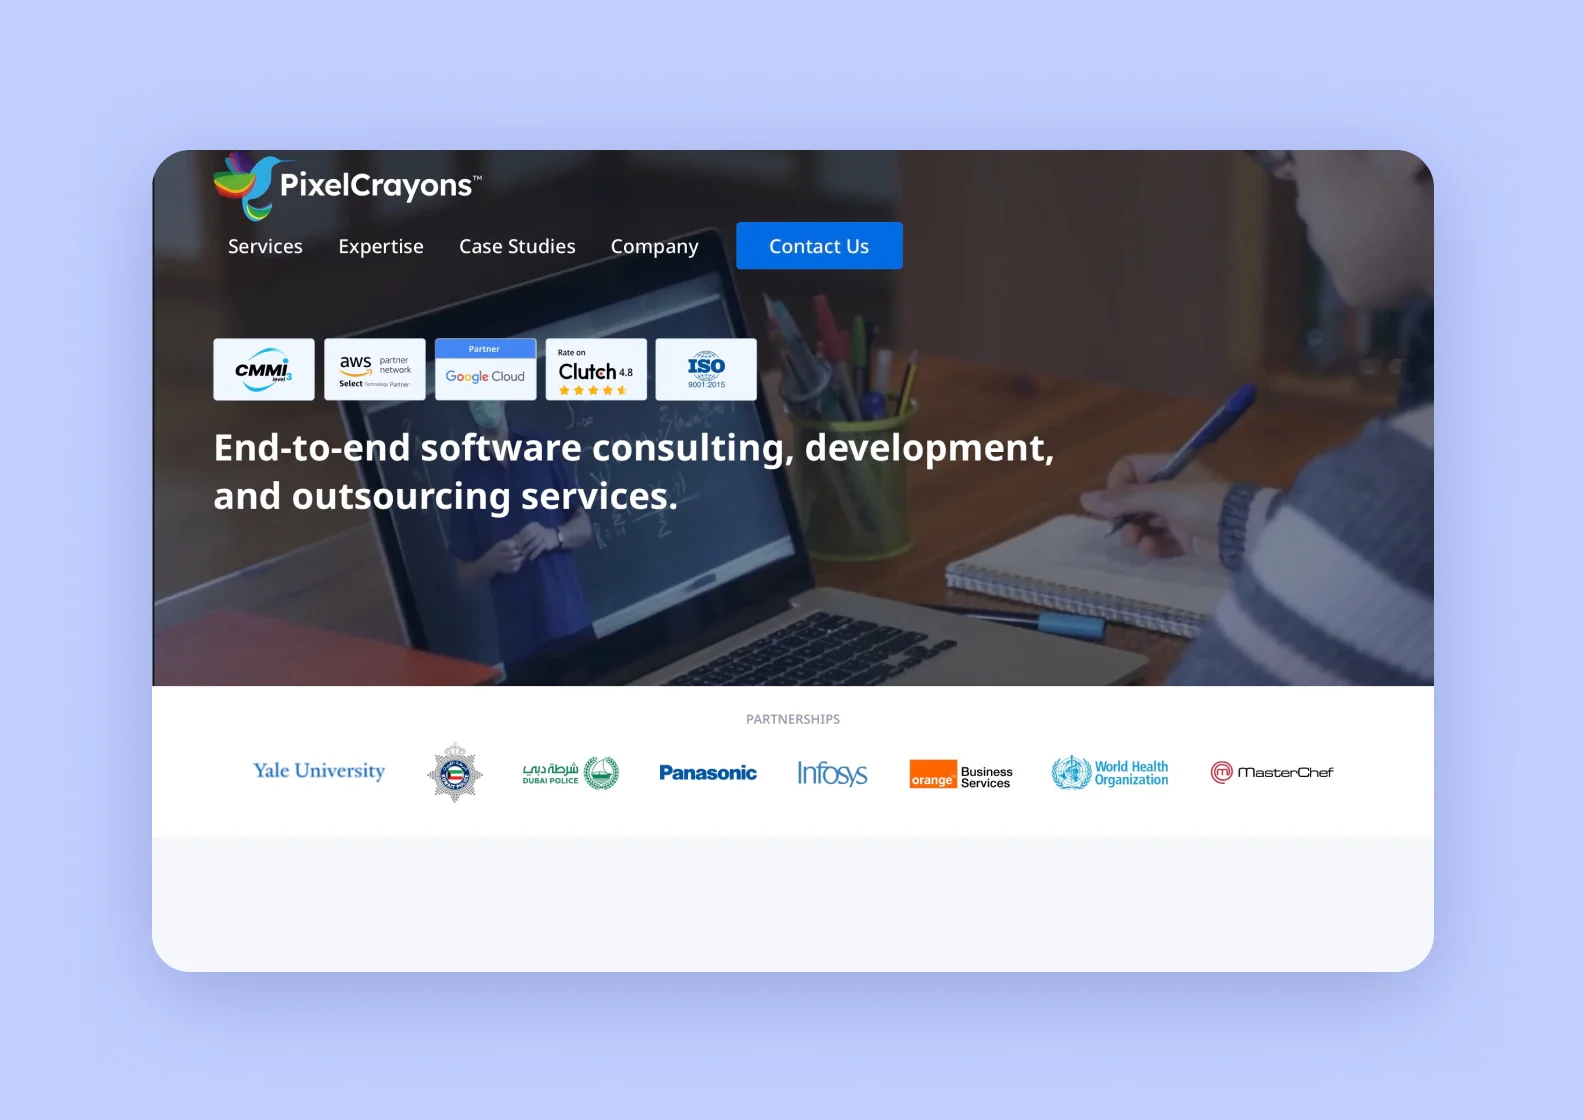 Pixelcrayons software outsourcing company